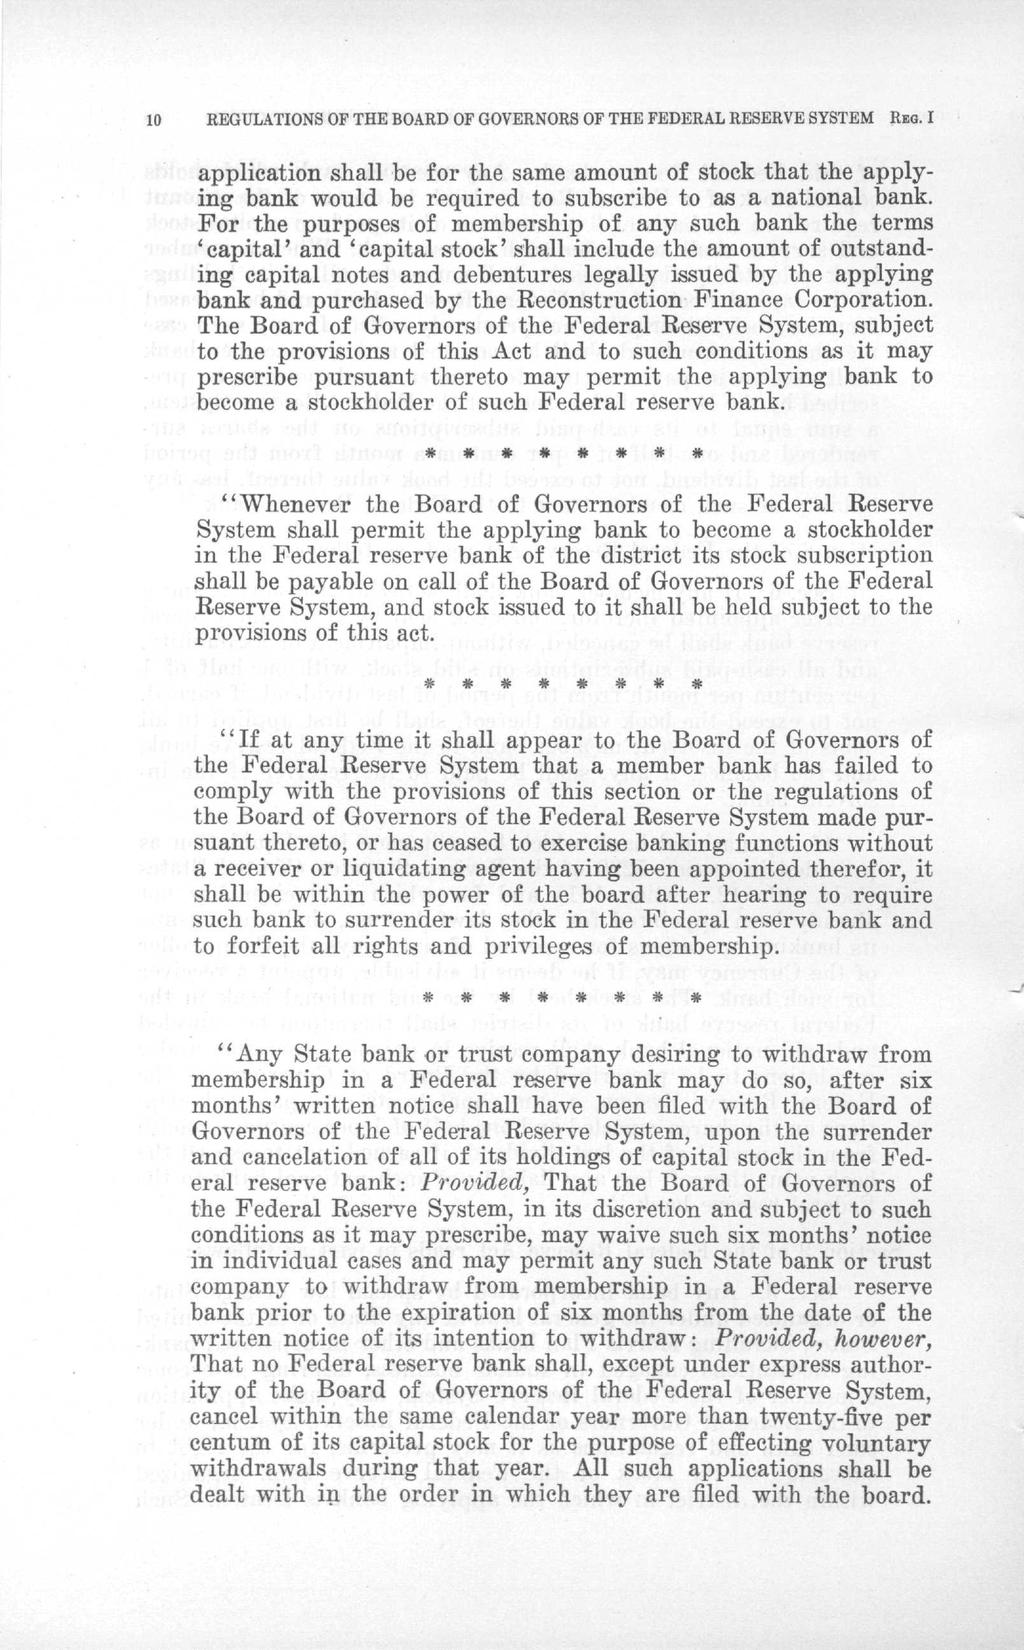 REGULATIONS OF THE BOARD OF GOVERNORS OF THE FEDERAL RESERVE SYSTEM REG.